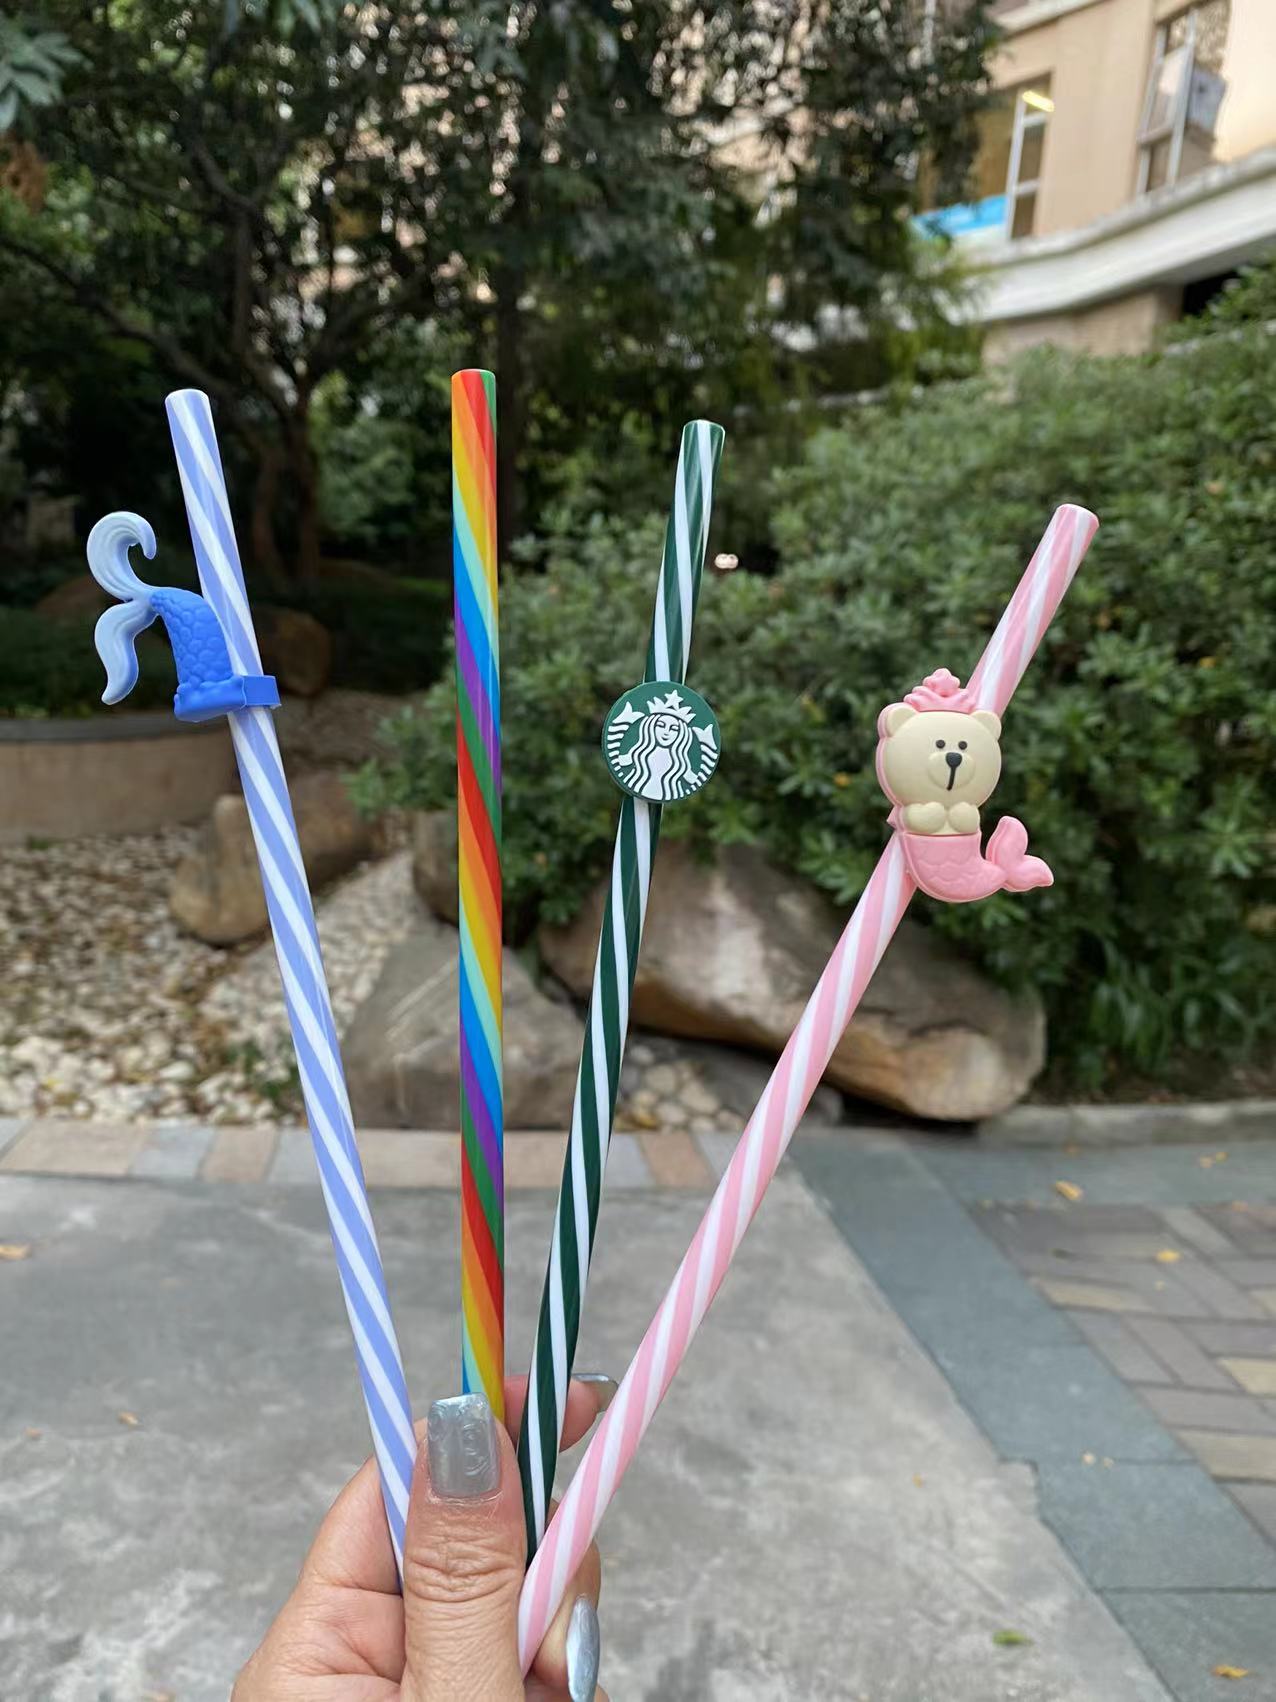 Starbucks Coffee Colorful Straw Set Of 4 Straws Rainbow Stripes Straw With Straw Brush Cute Bear, Siren Logo And Fish Tale Toppers